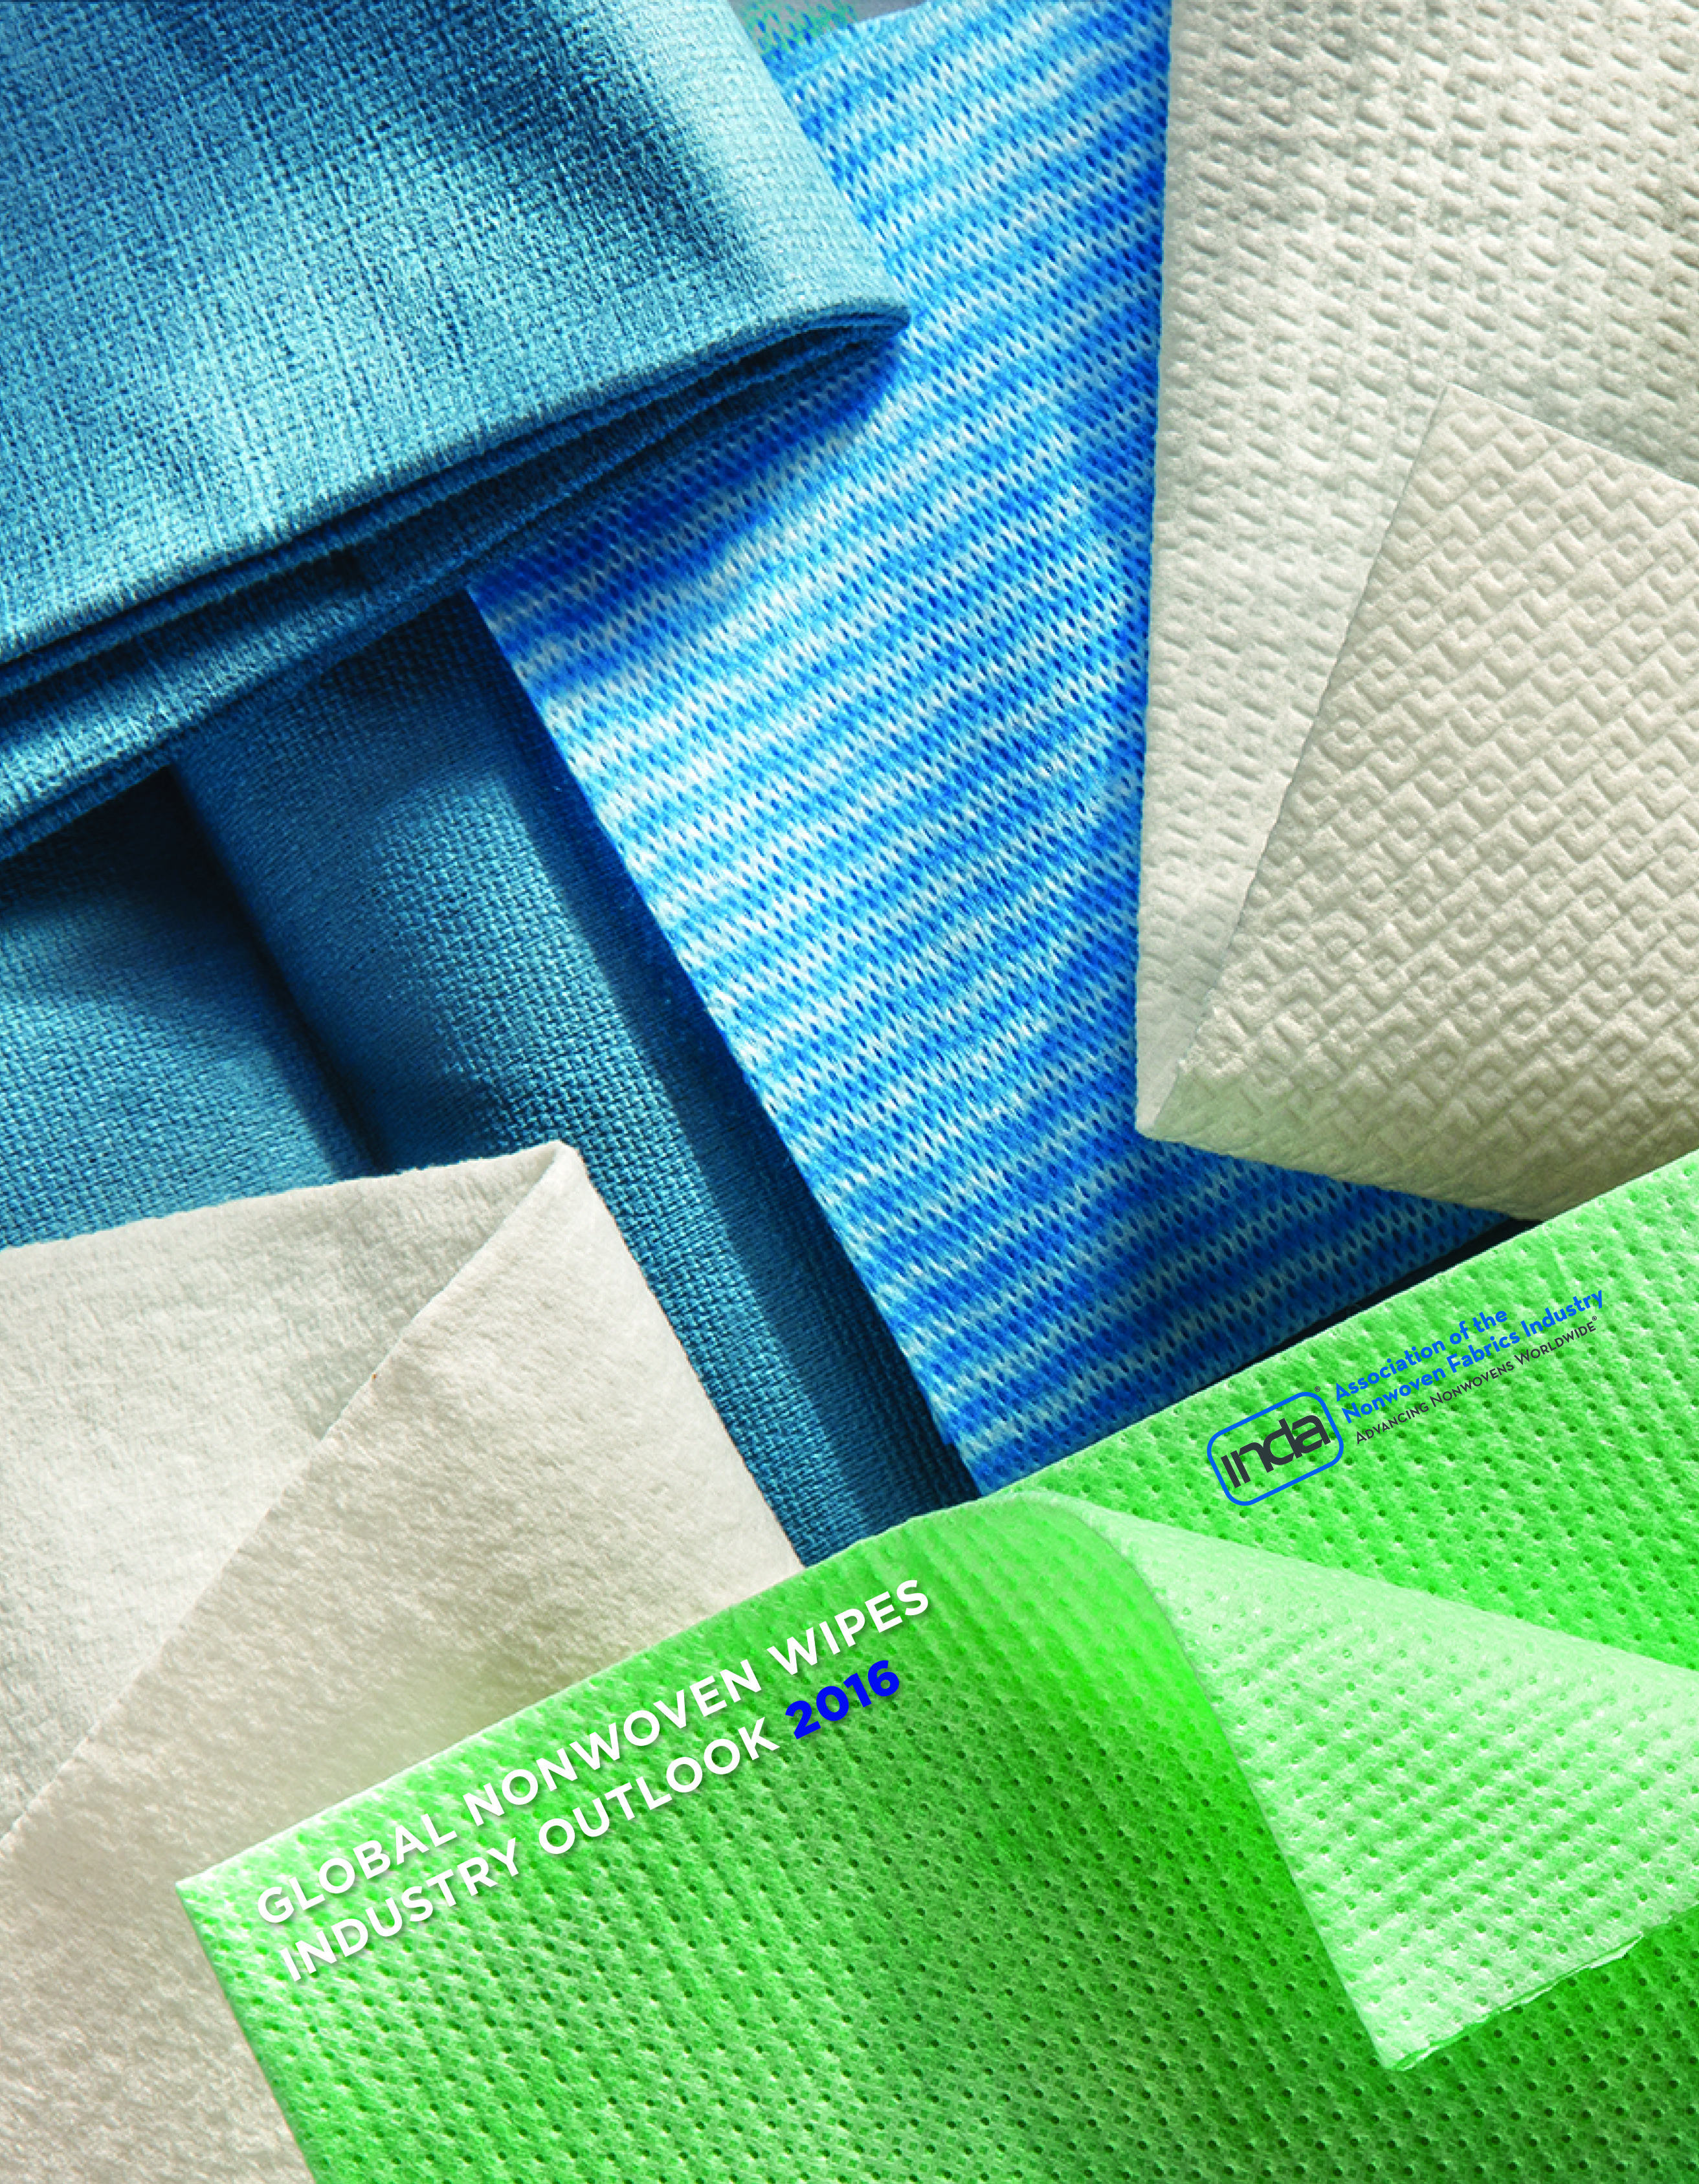 Global Nonwoven Wipes Industry Outlook, 2016